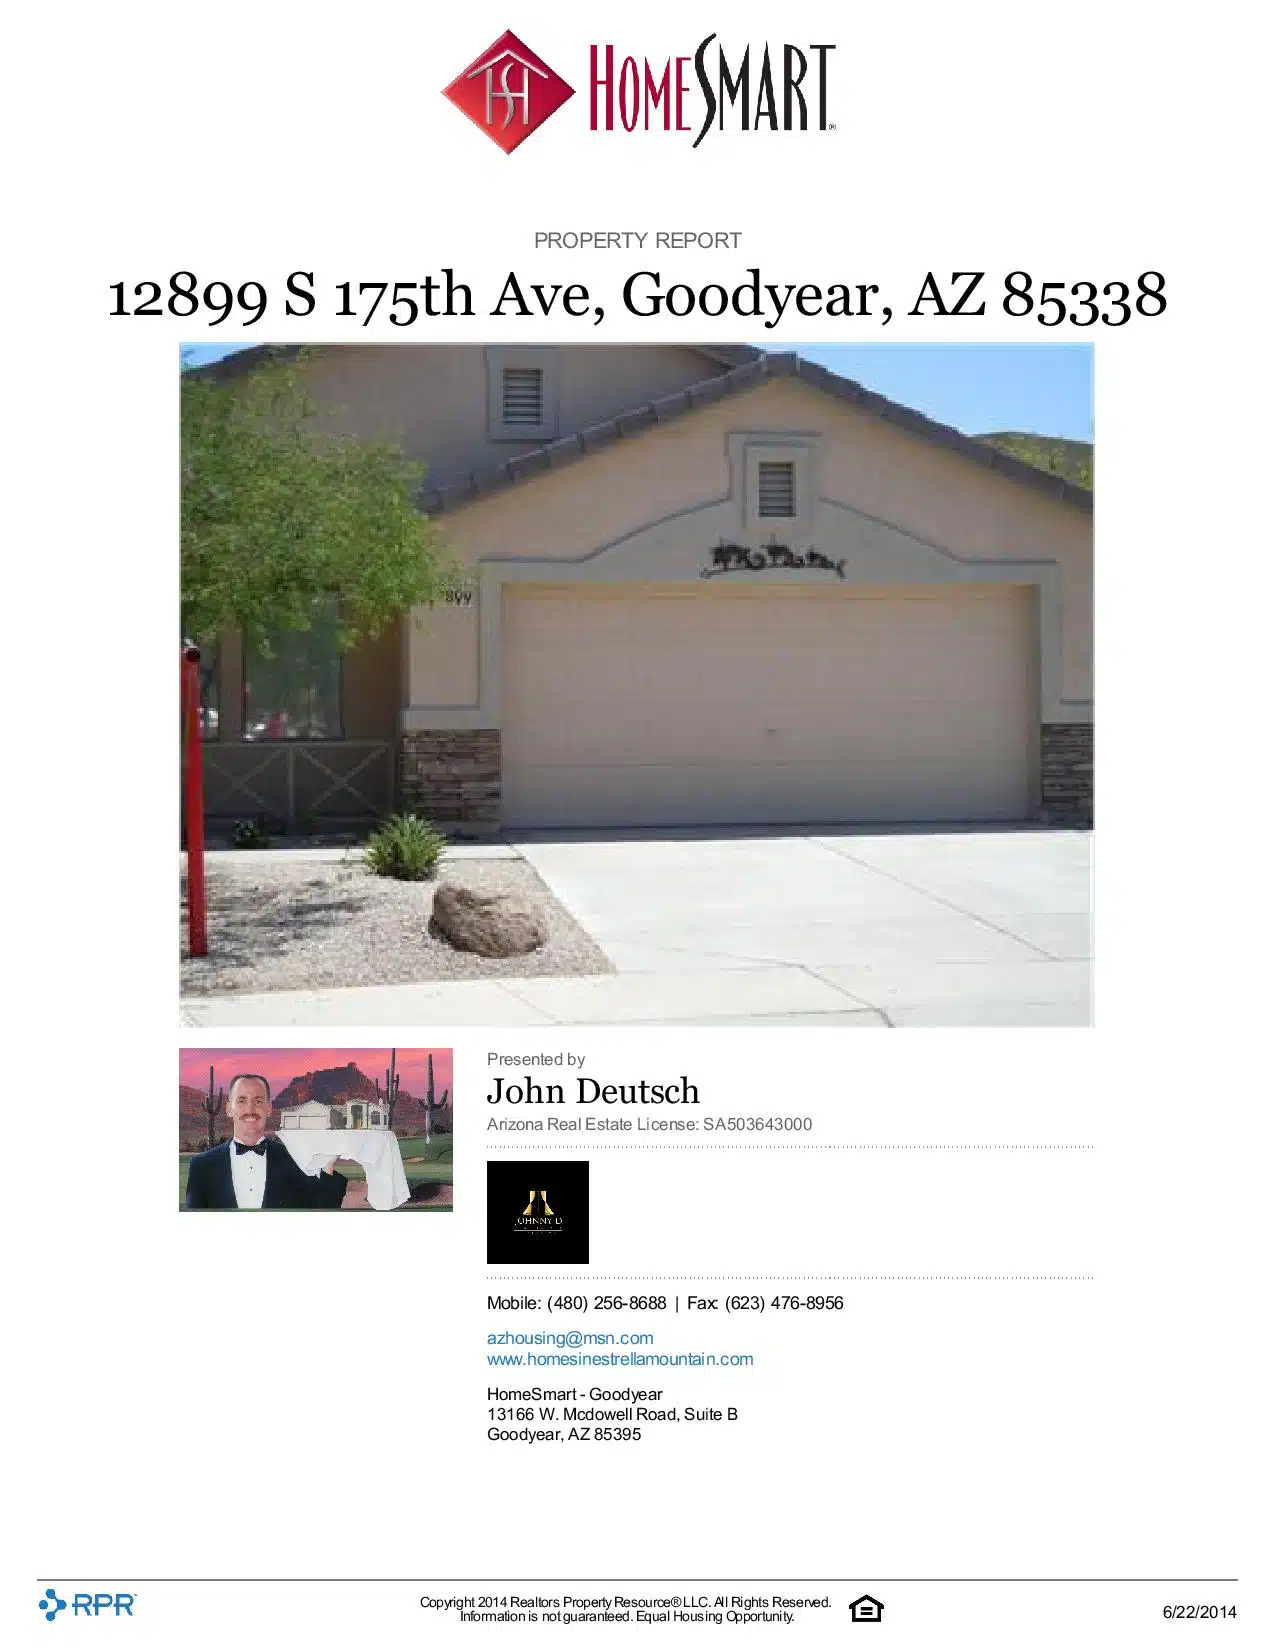 12899-S-175th-Ave-Goodyear-AZ-85338-page-001